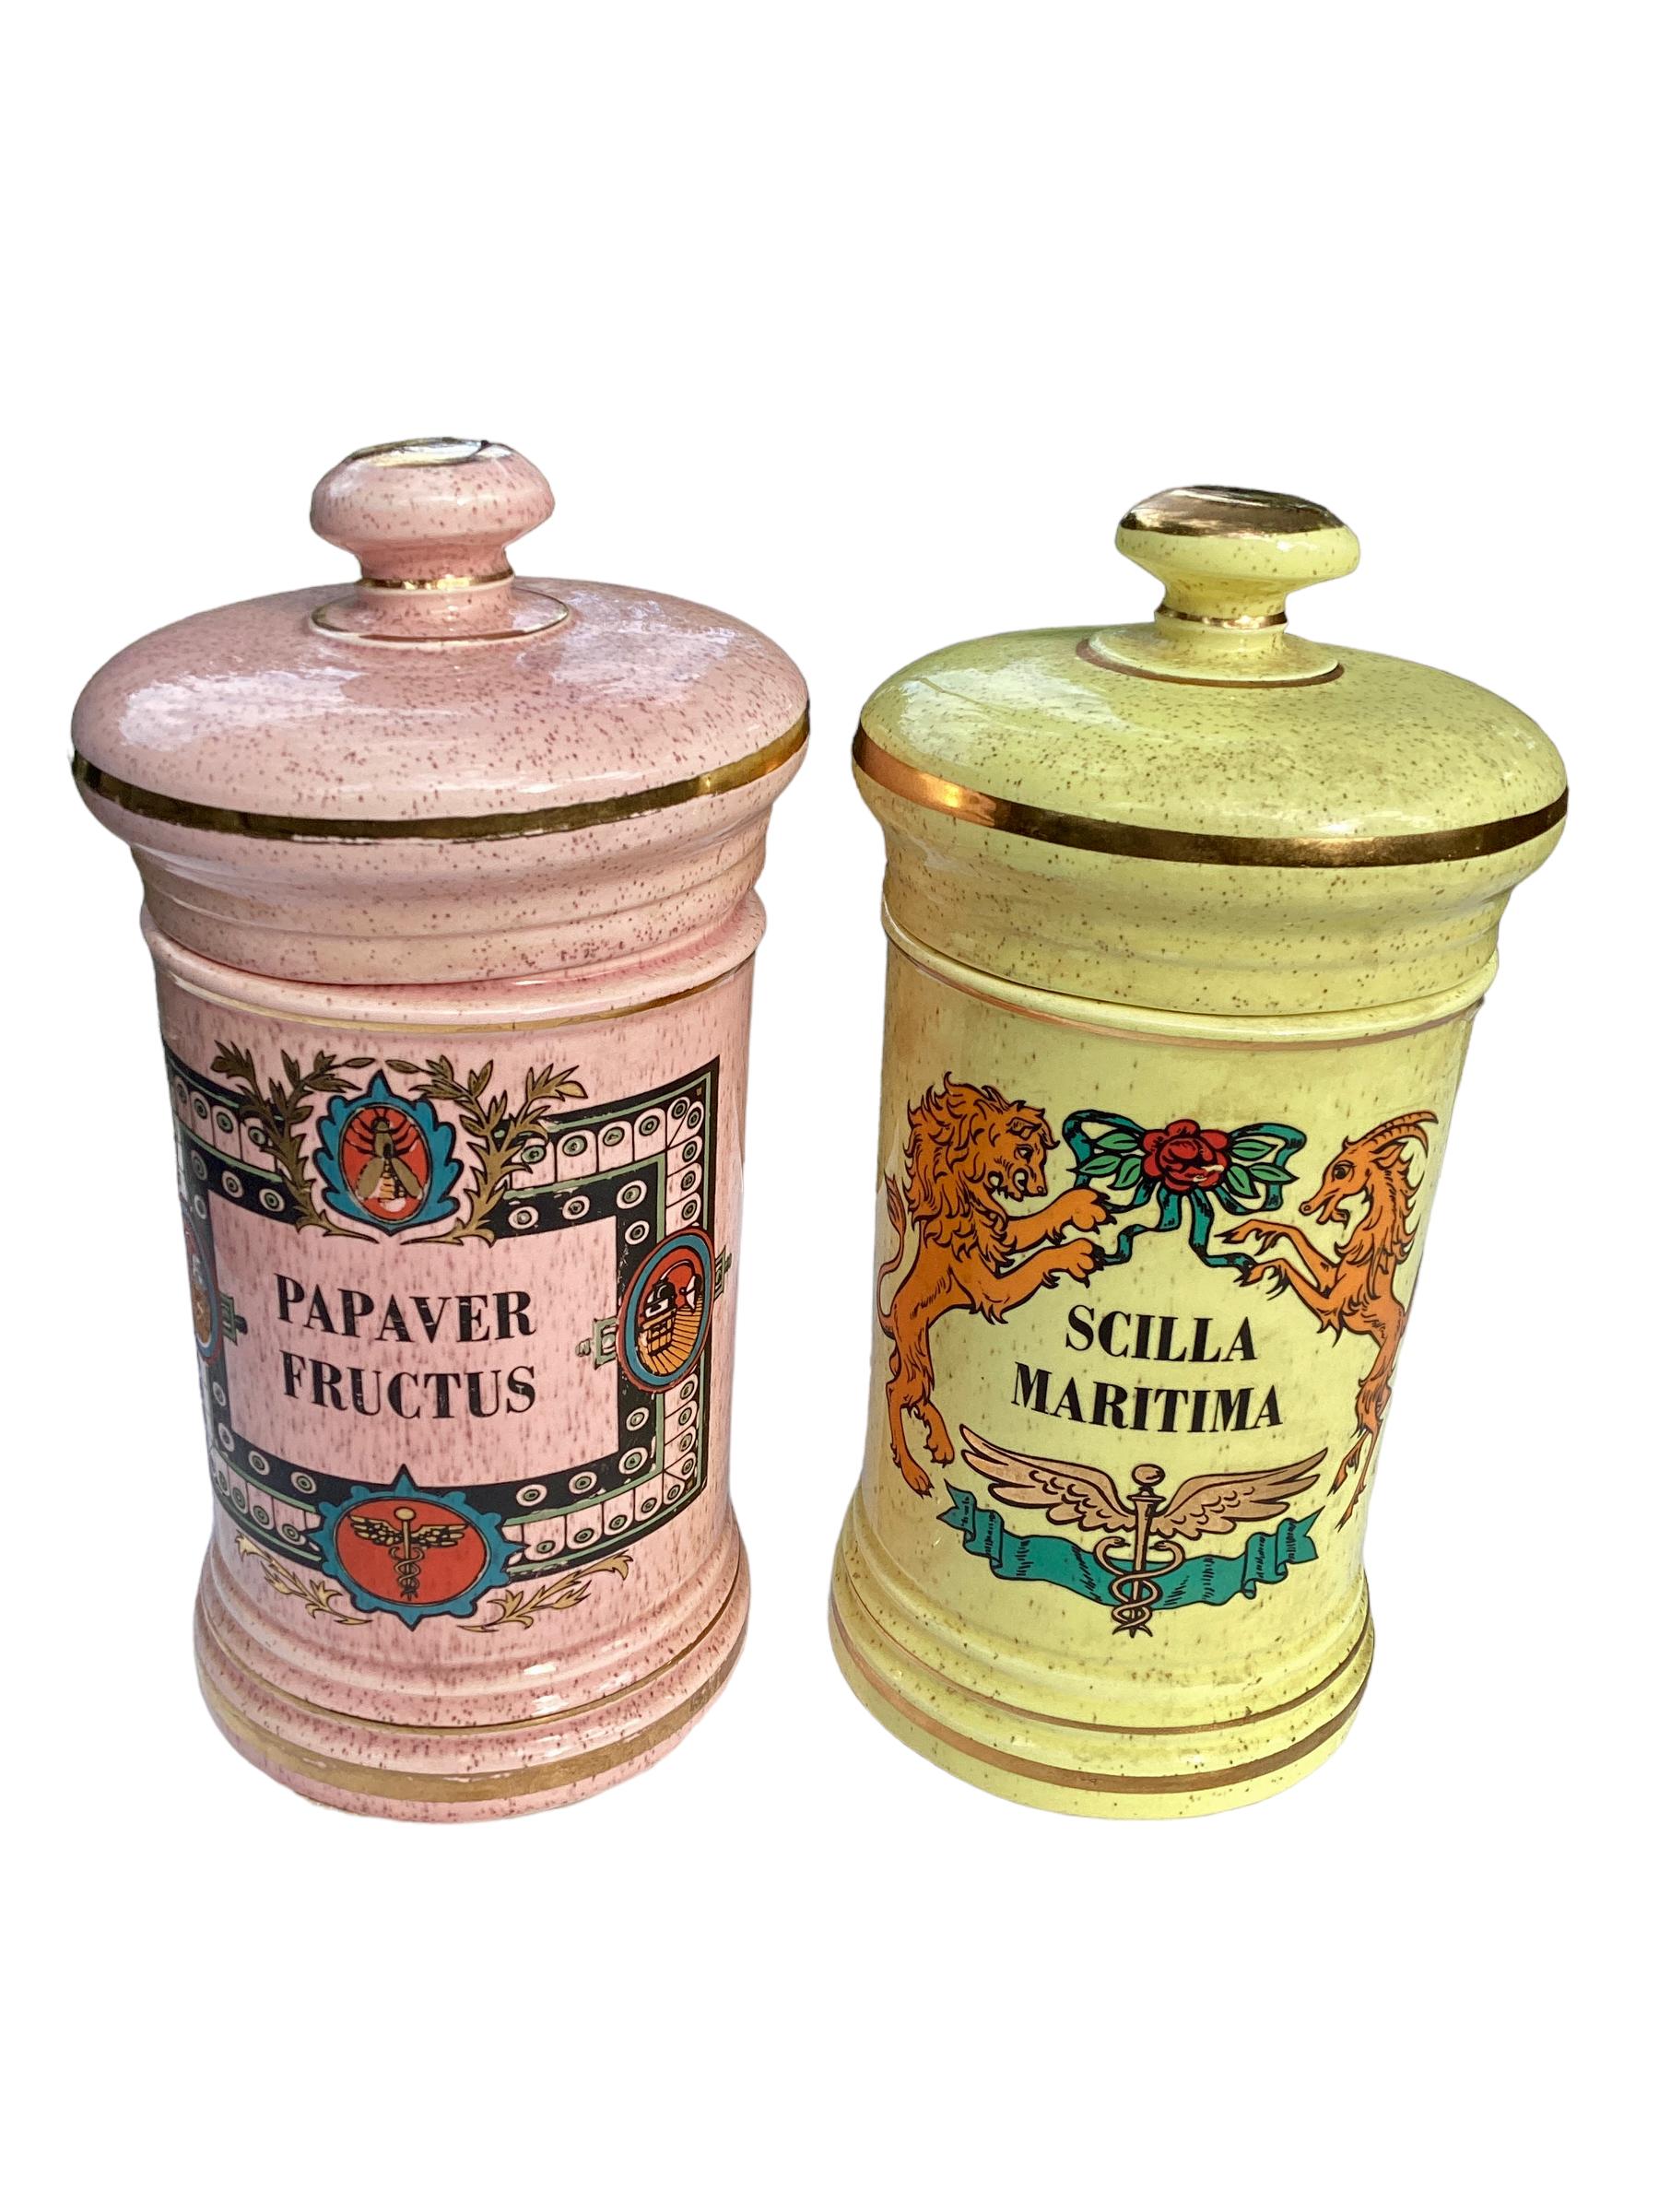 Pair of Antique American Covered Apothecary Jars. Vibrant colors in pink and yellow. The yellow jar is decorated with a lion and a ram and the pink one has various decorative objects including an insect and the symbol of a pharmacy. Both are trimmed